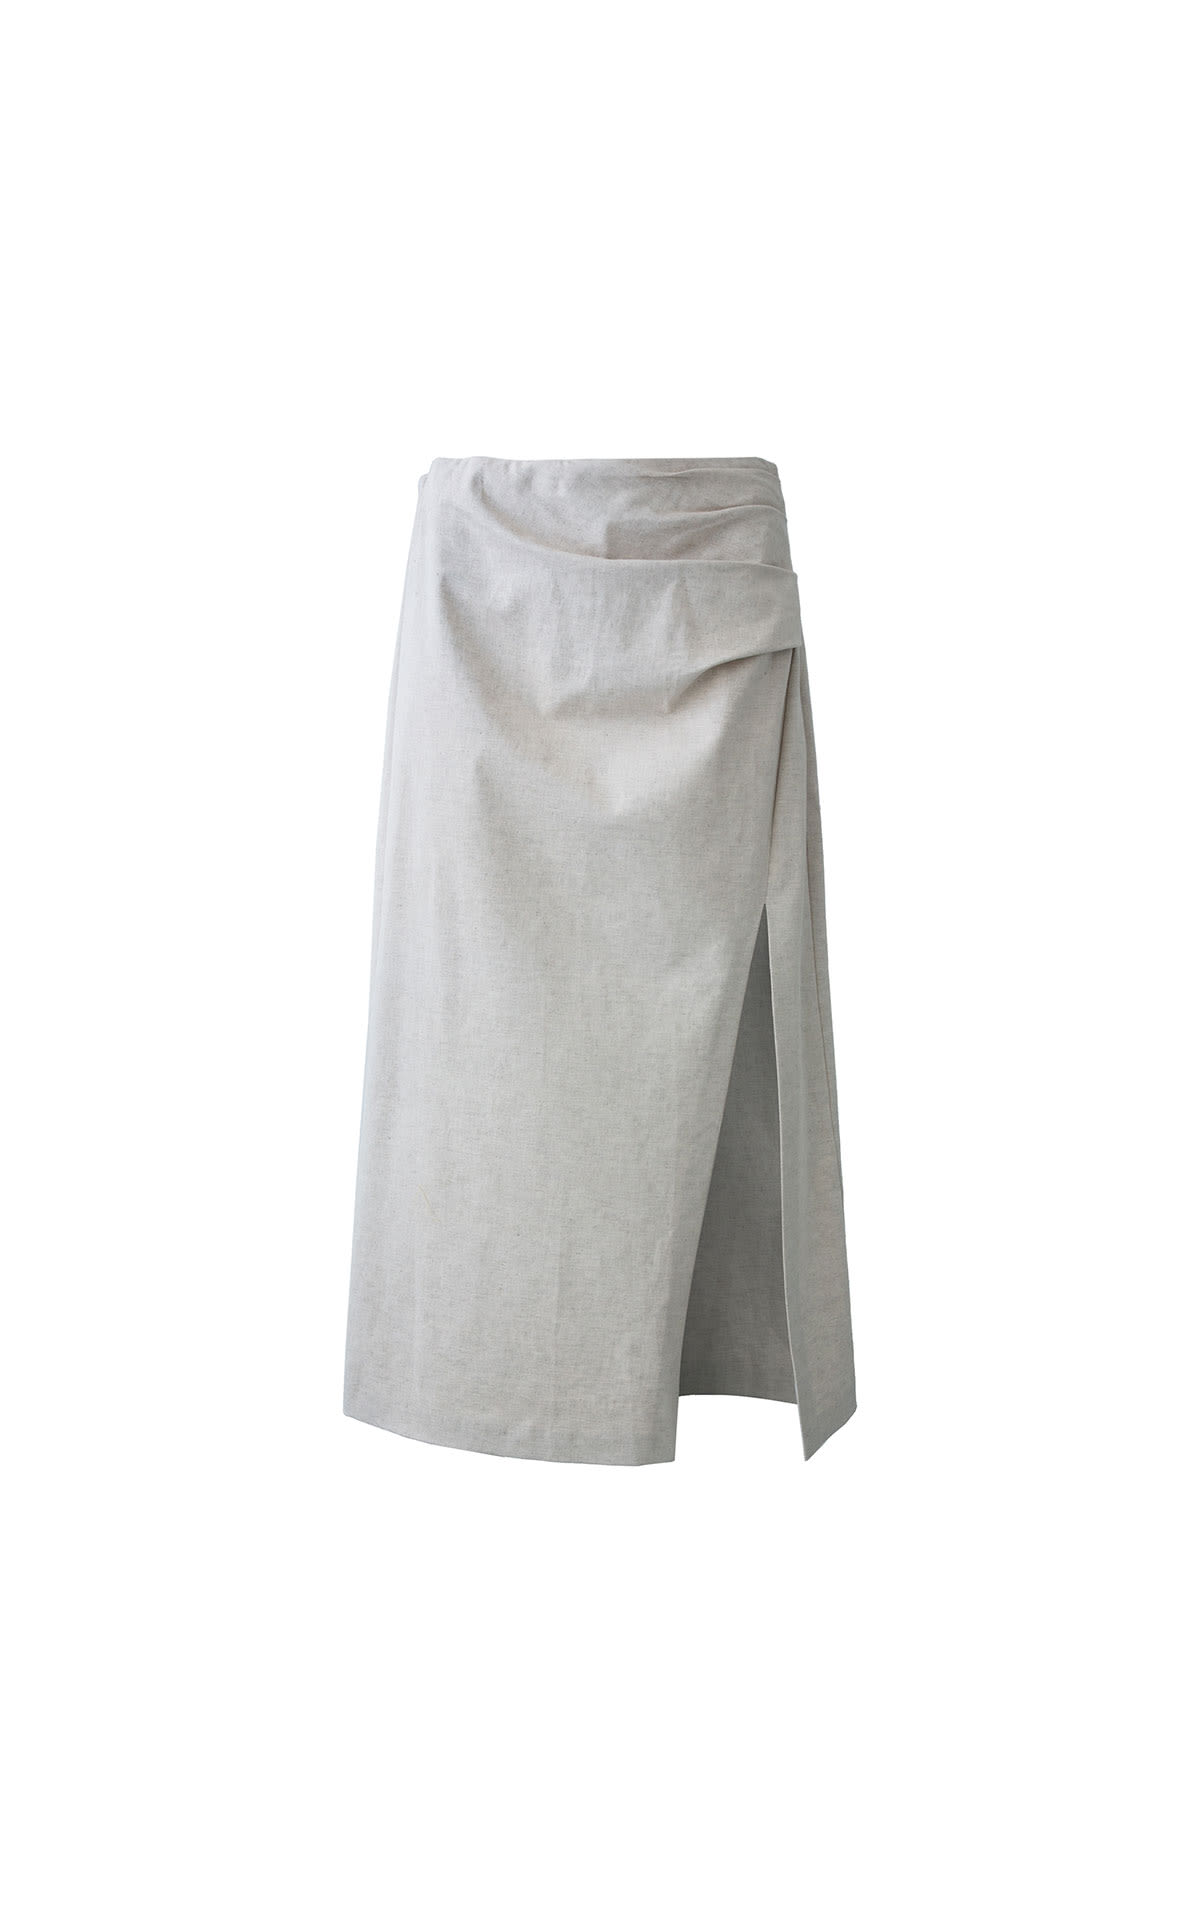 DKNY Linen ruched midi skirt with slit from Bicester Village